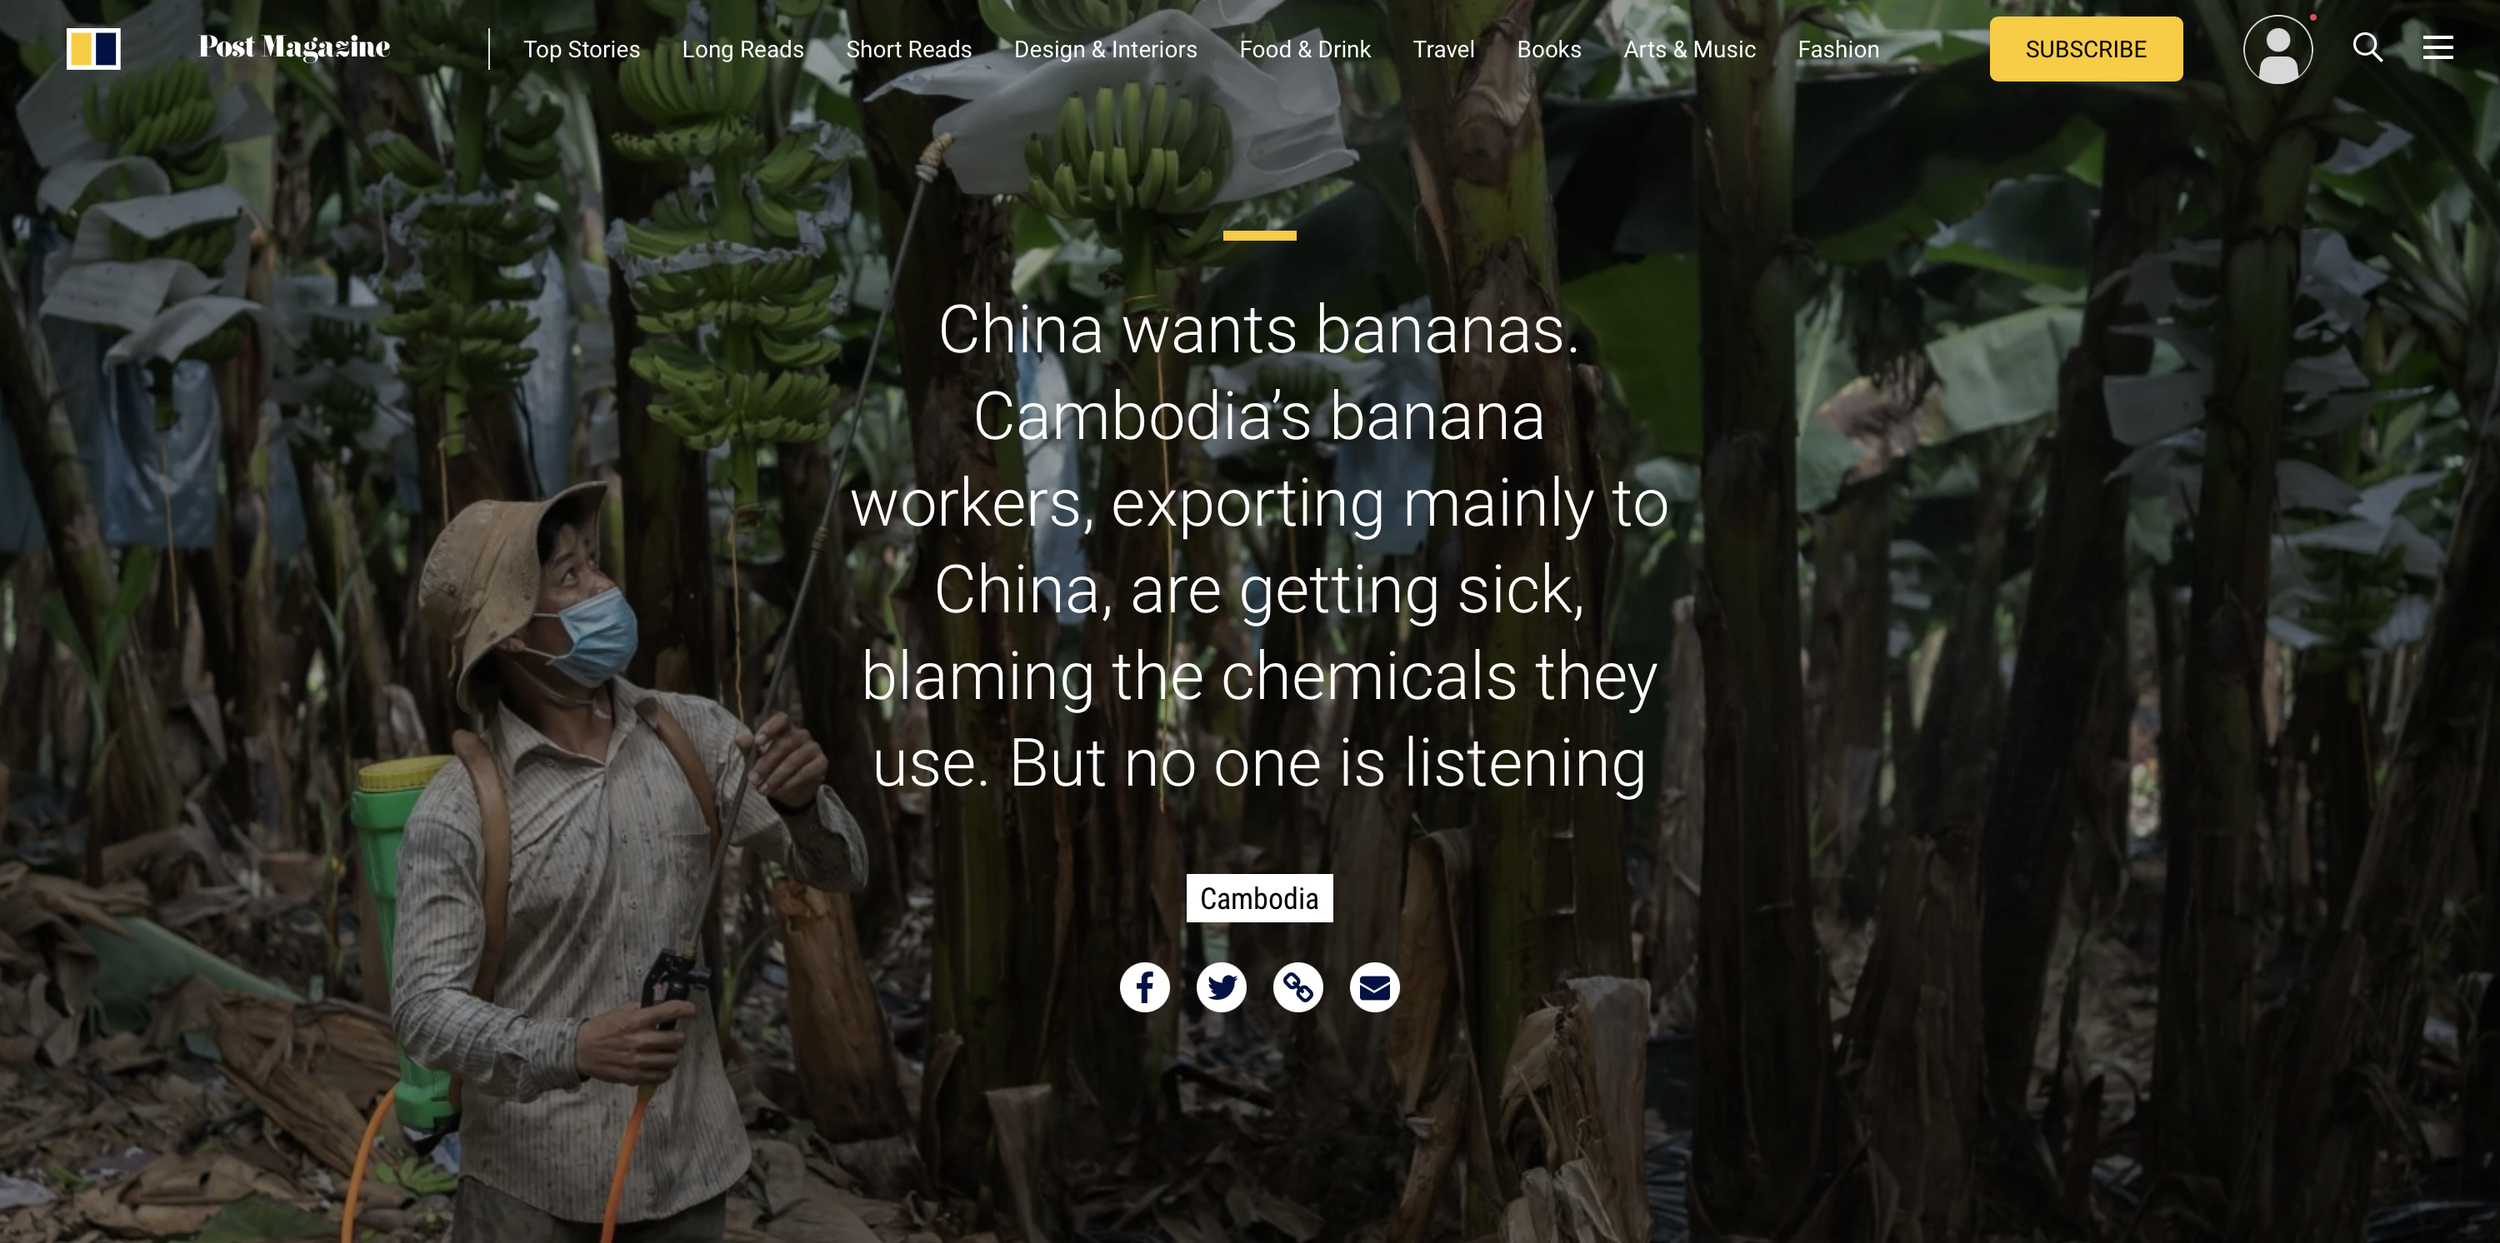 27 March 2022 - China bananas in Cambodia - SCMP .png